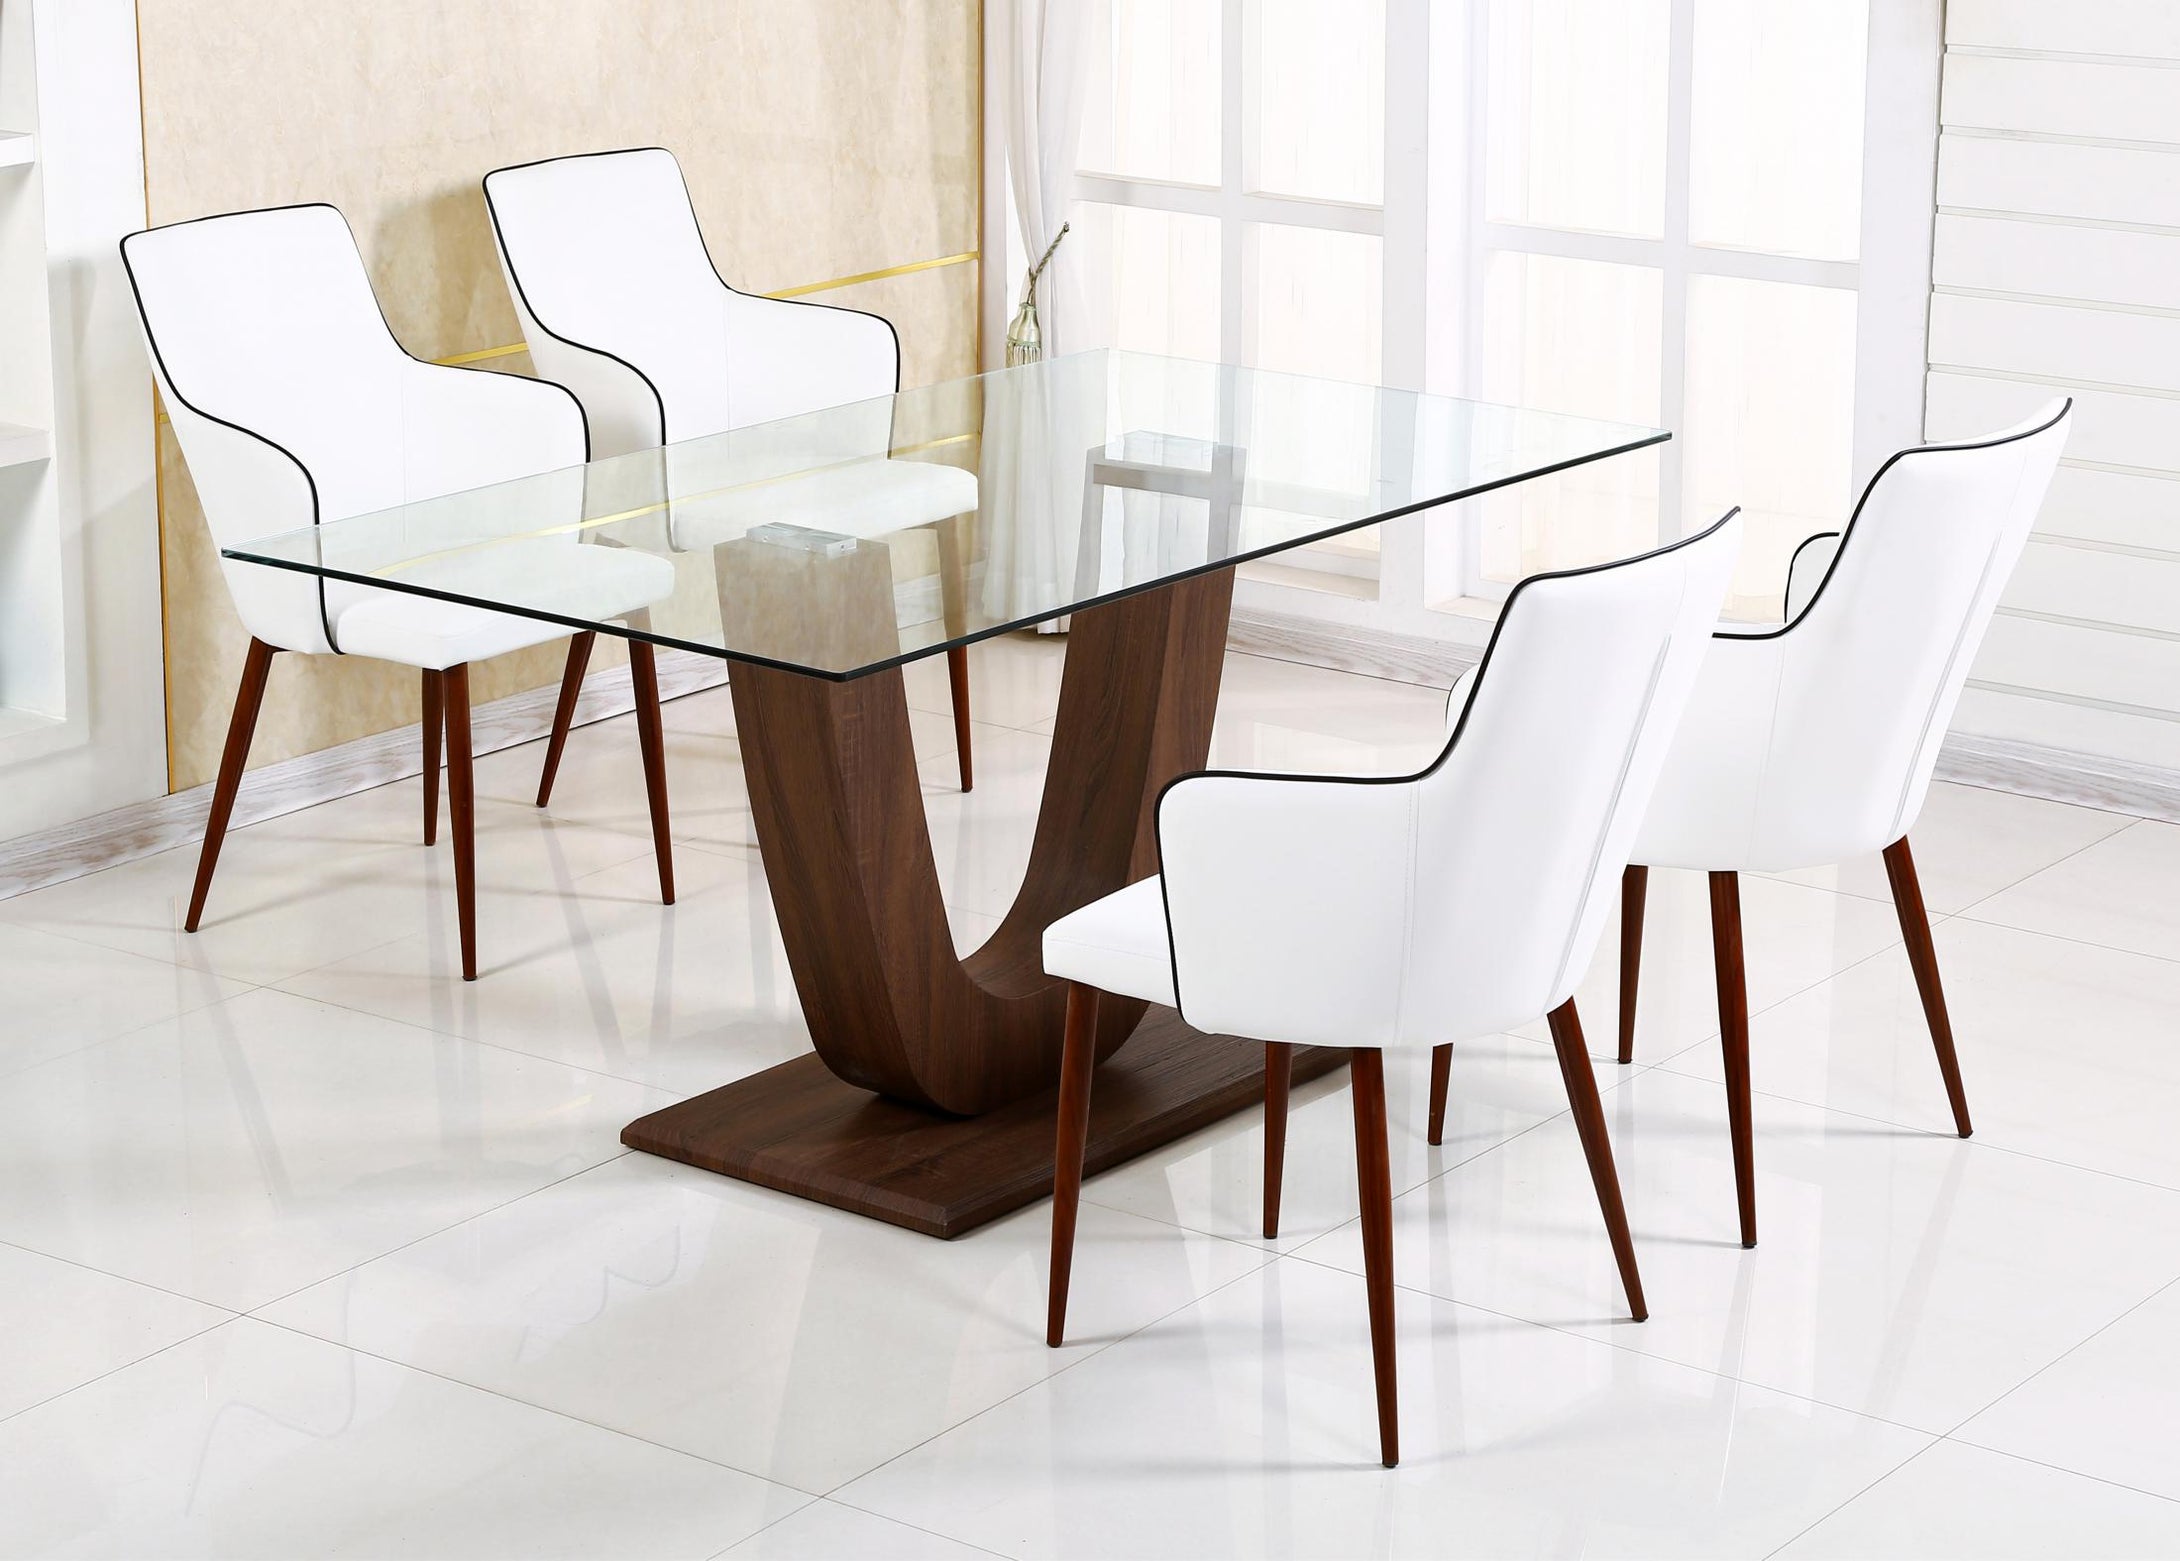 Capri Dining Table Clear Glass Walnut with 6 Chairs